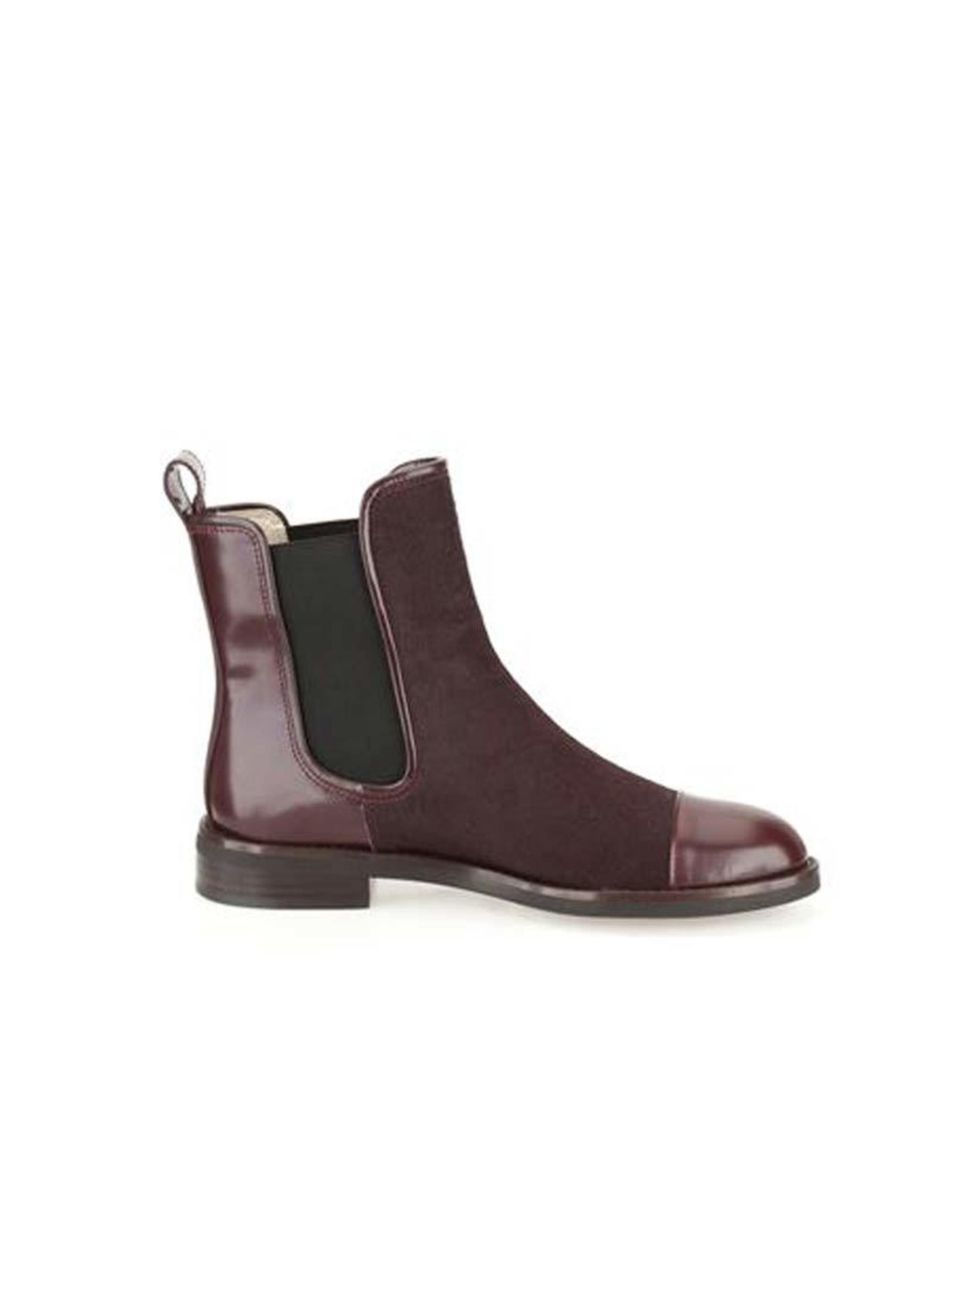 <p>Wear with bare legs now, and rolled up jeans when the temperature plummets.</p>

<p> </p>

<p><a href="http://www.clarks.co.uk/p/26104670" target="_blank">Clarks x Orla Kiely</a> boots, £160</p>